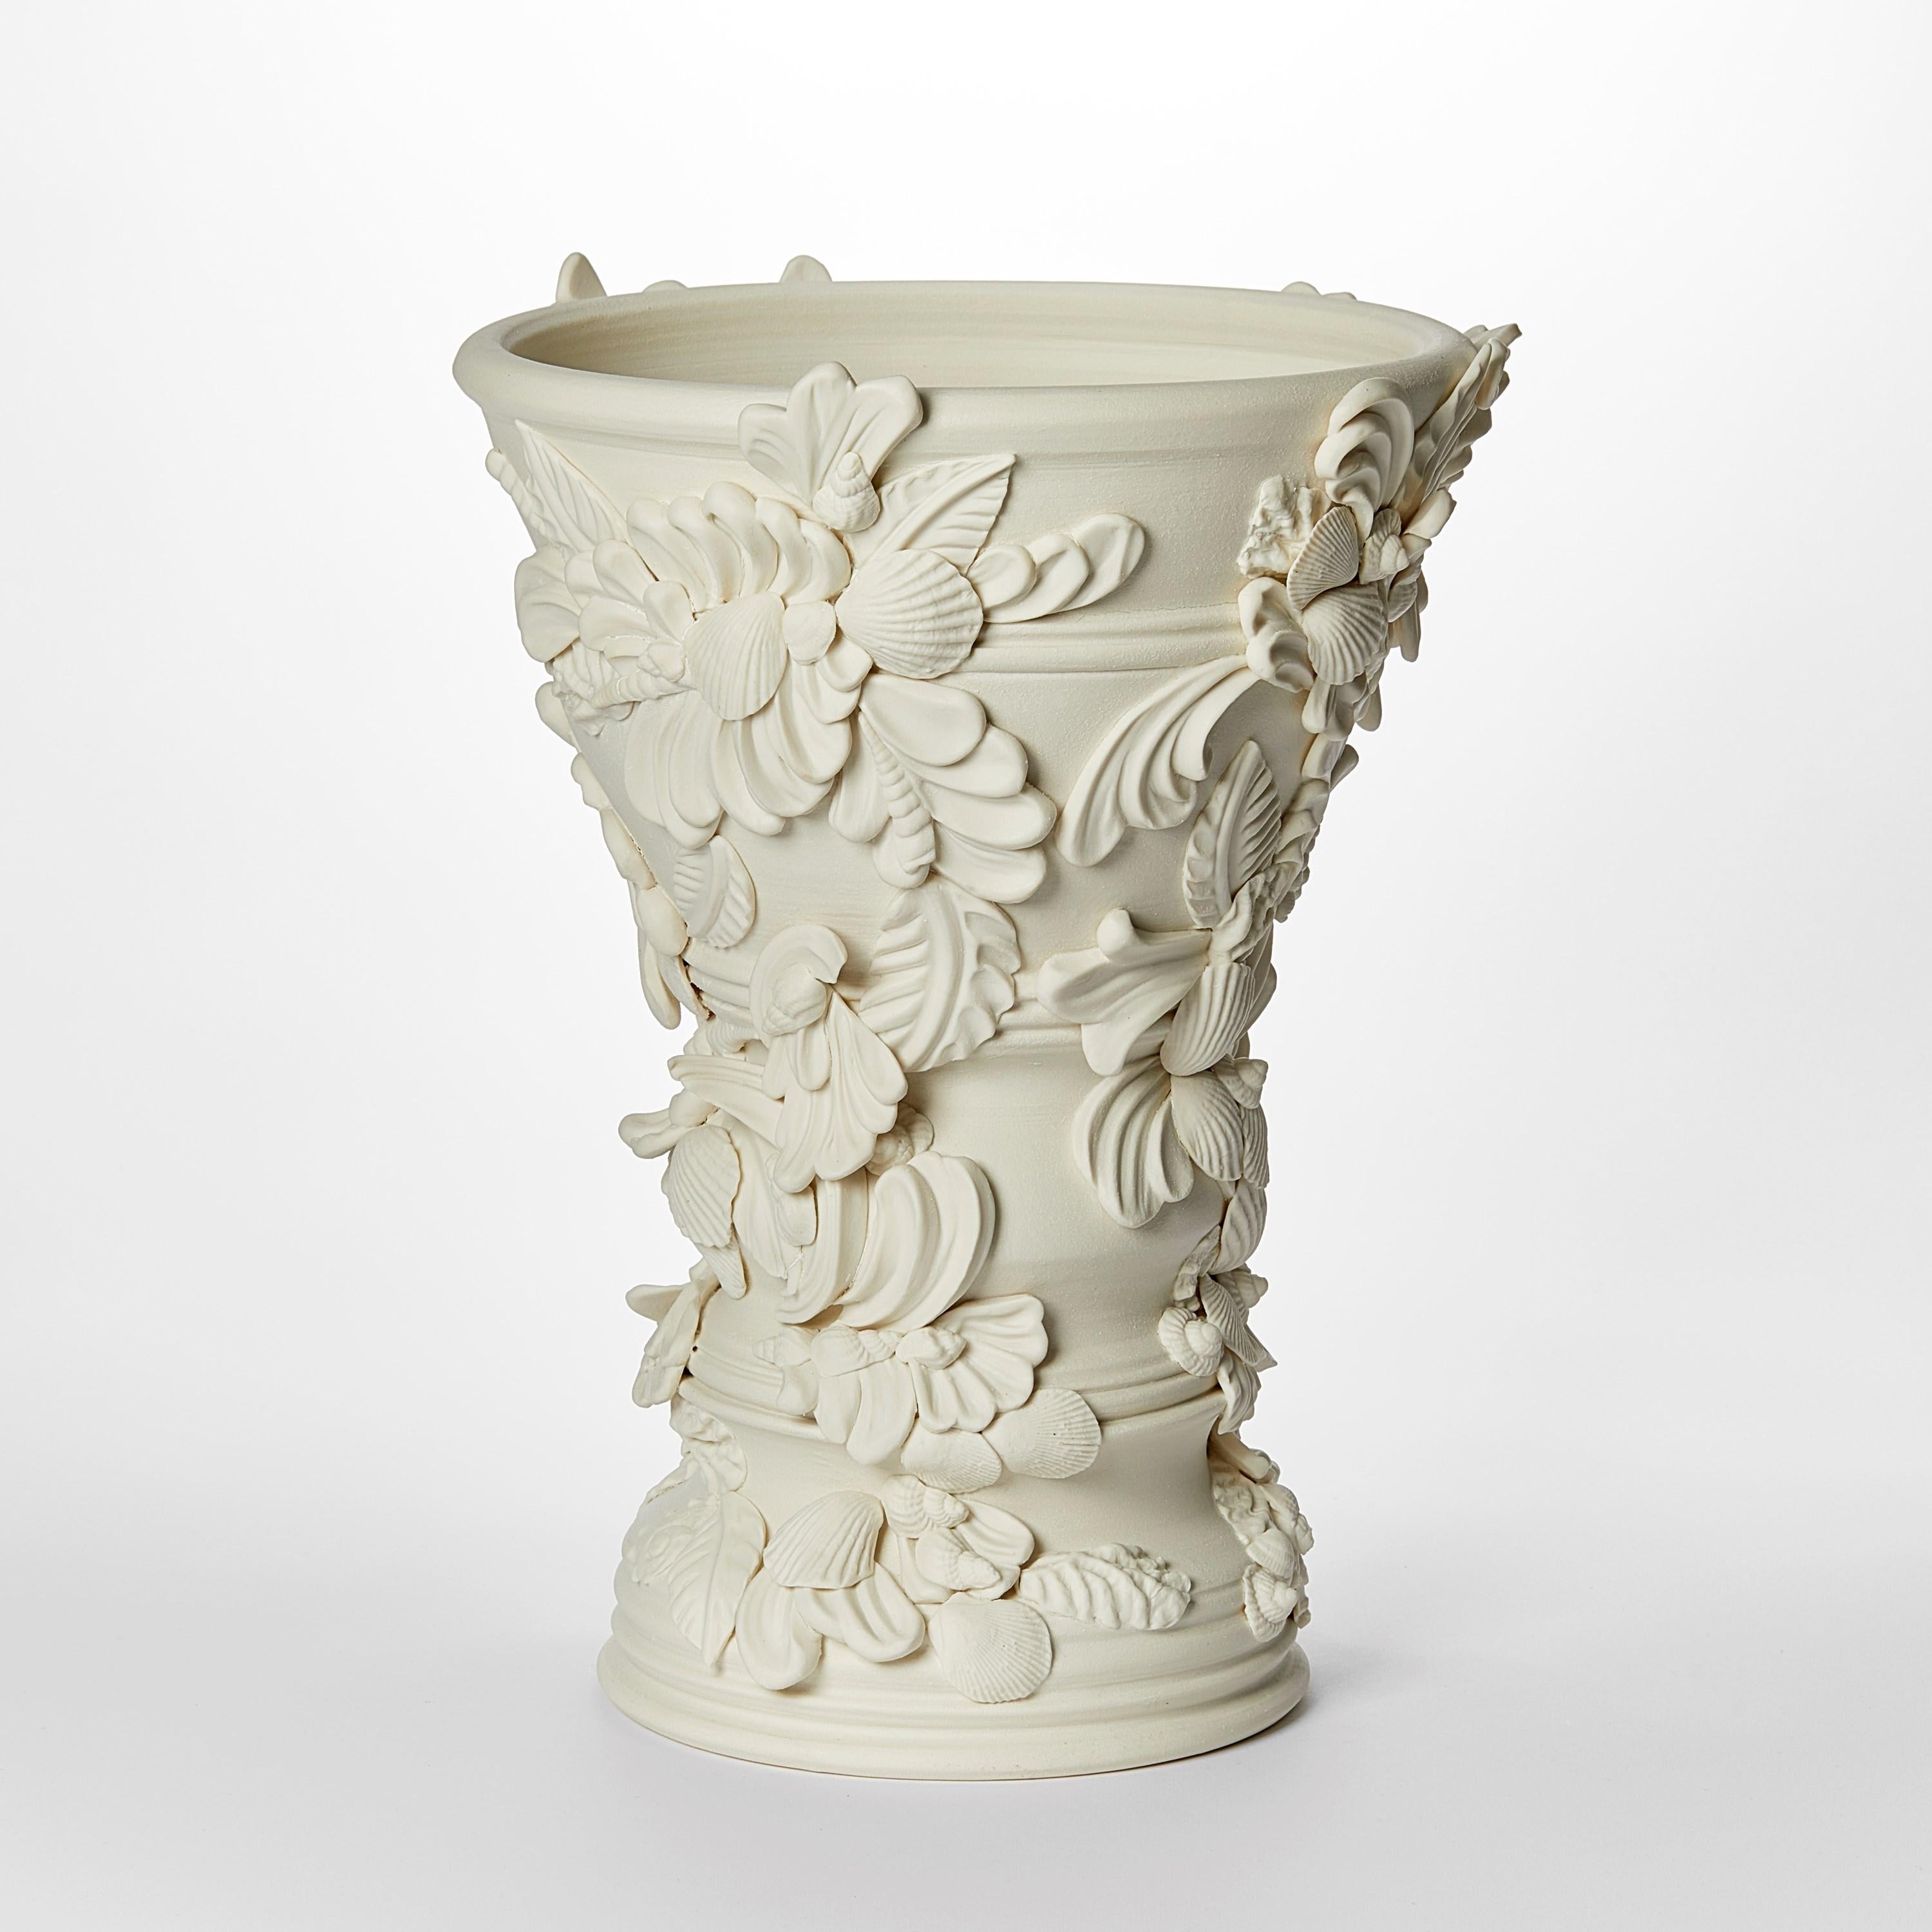 British  Rocaille III, porcelain sculptural vase with flourishes & shells by Jo Taylor